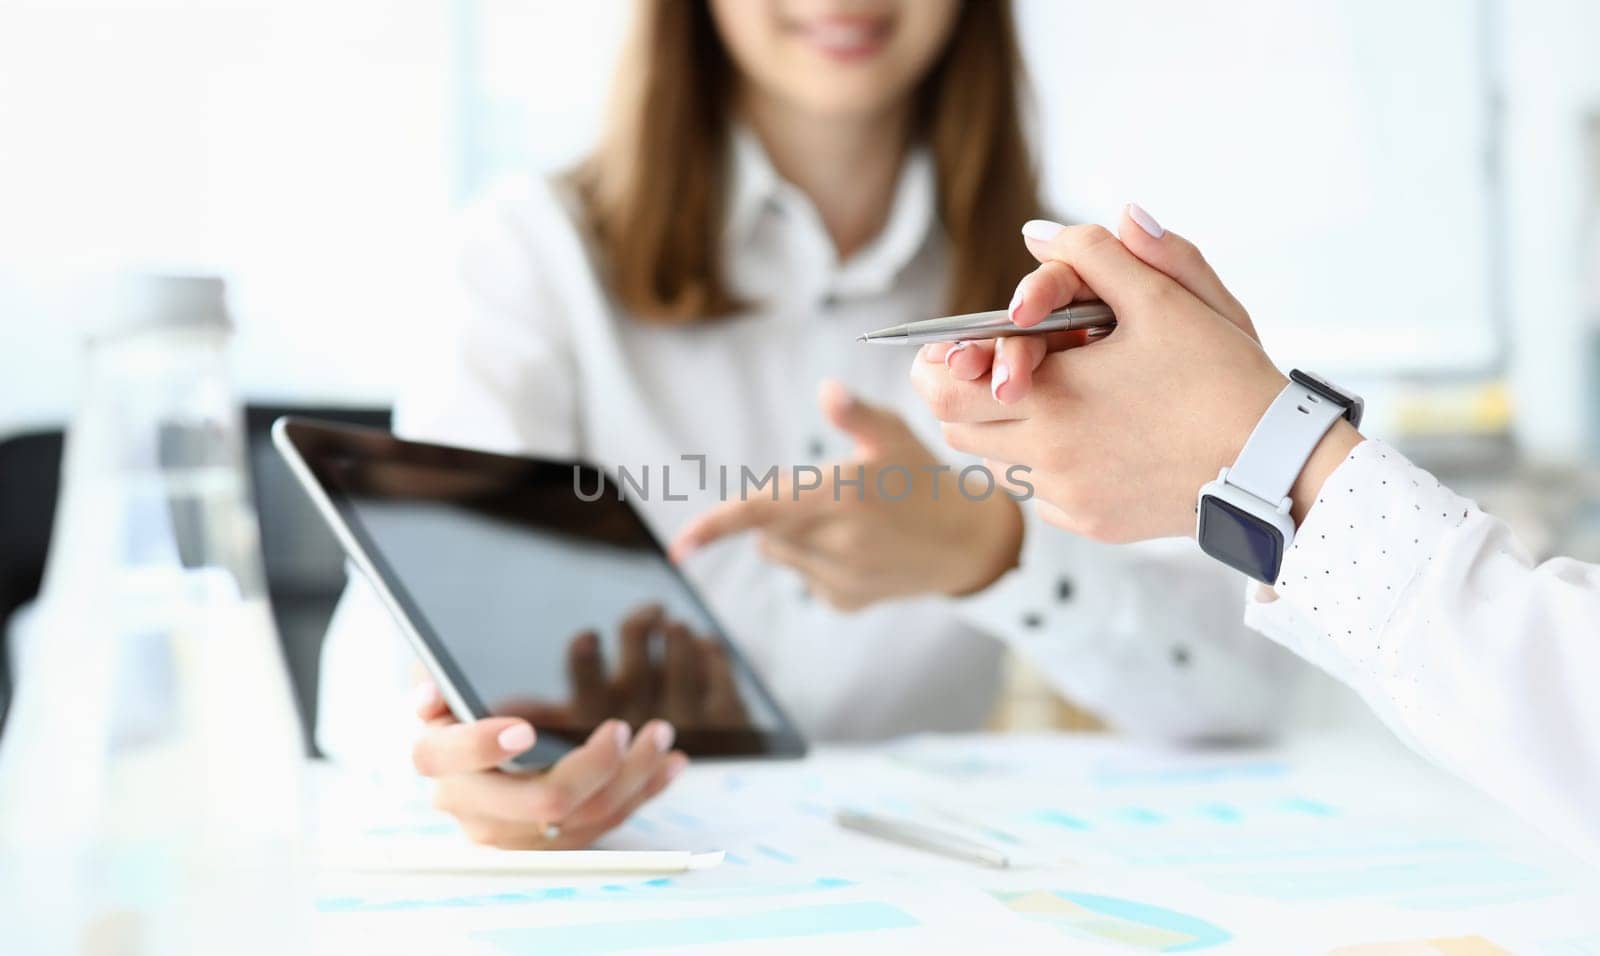 Focus on tender female hands holding pen. Manager demonstrating something on modern tablet with empty copy space. Smart businesspeople discussing something important. Business meeting concept